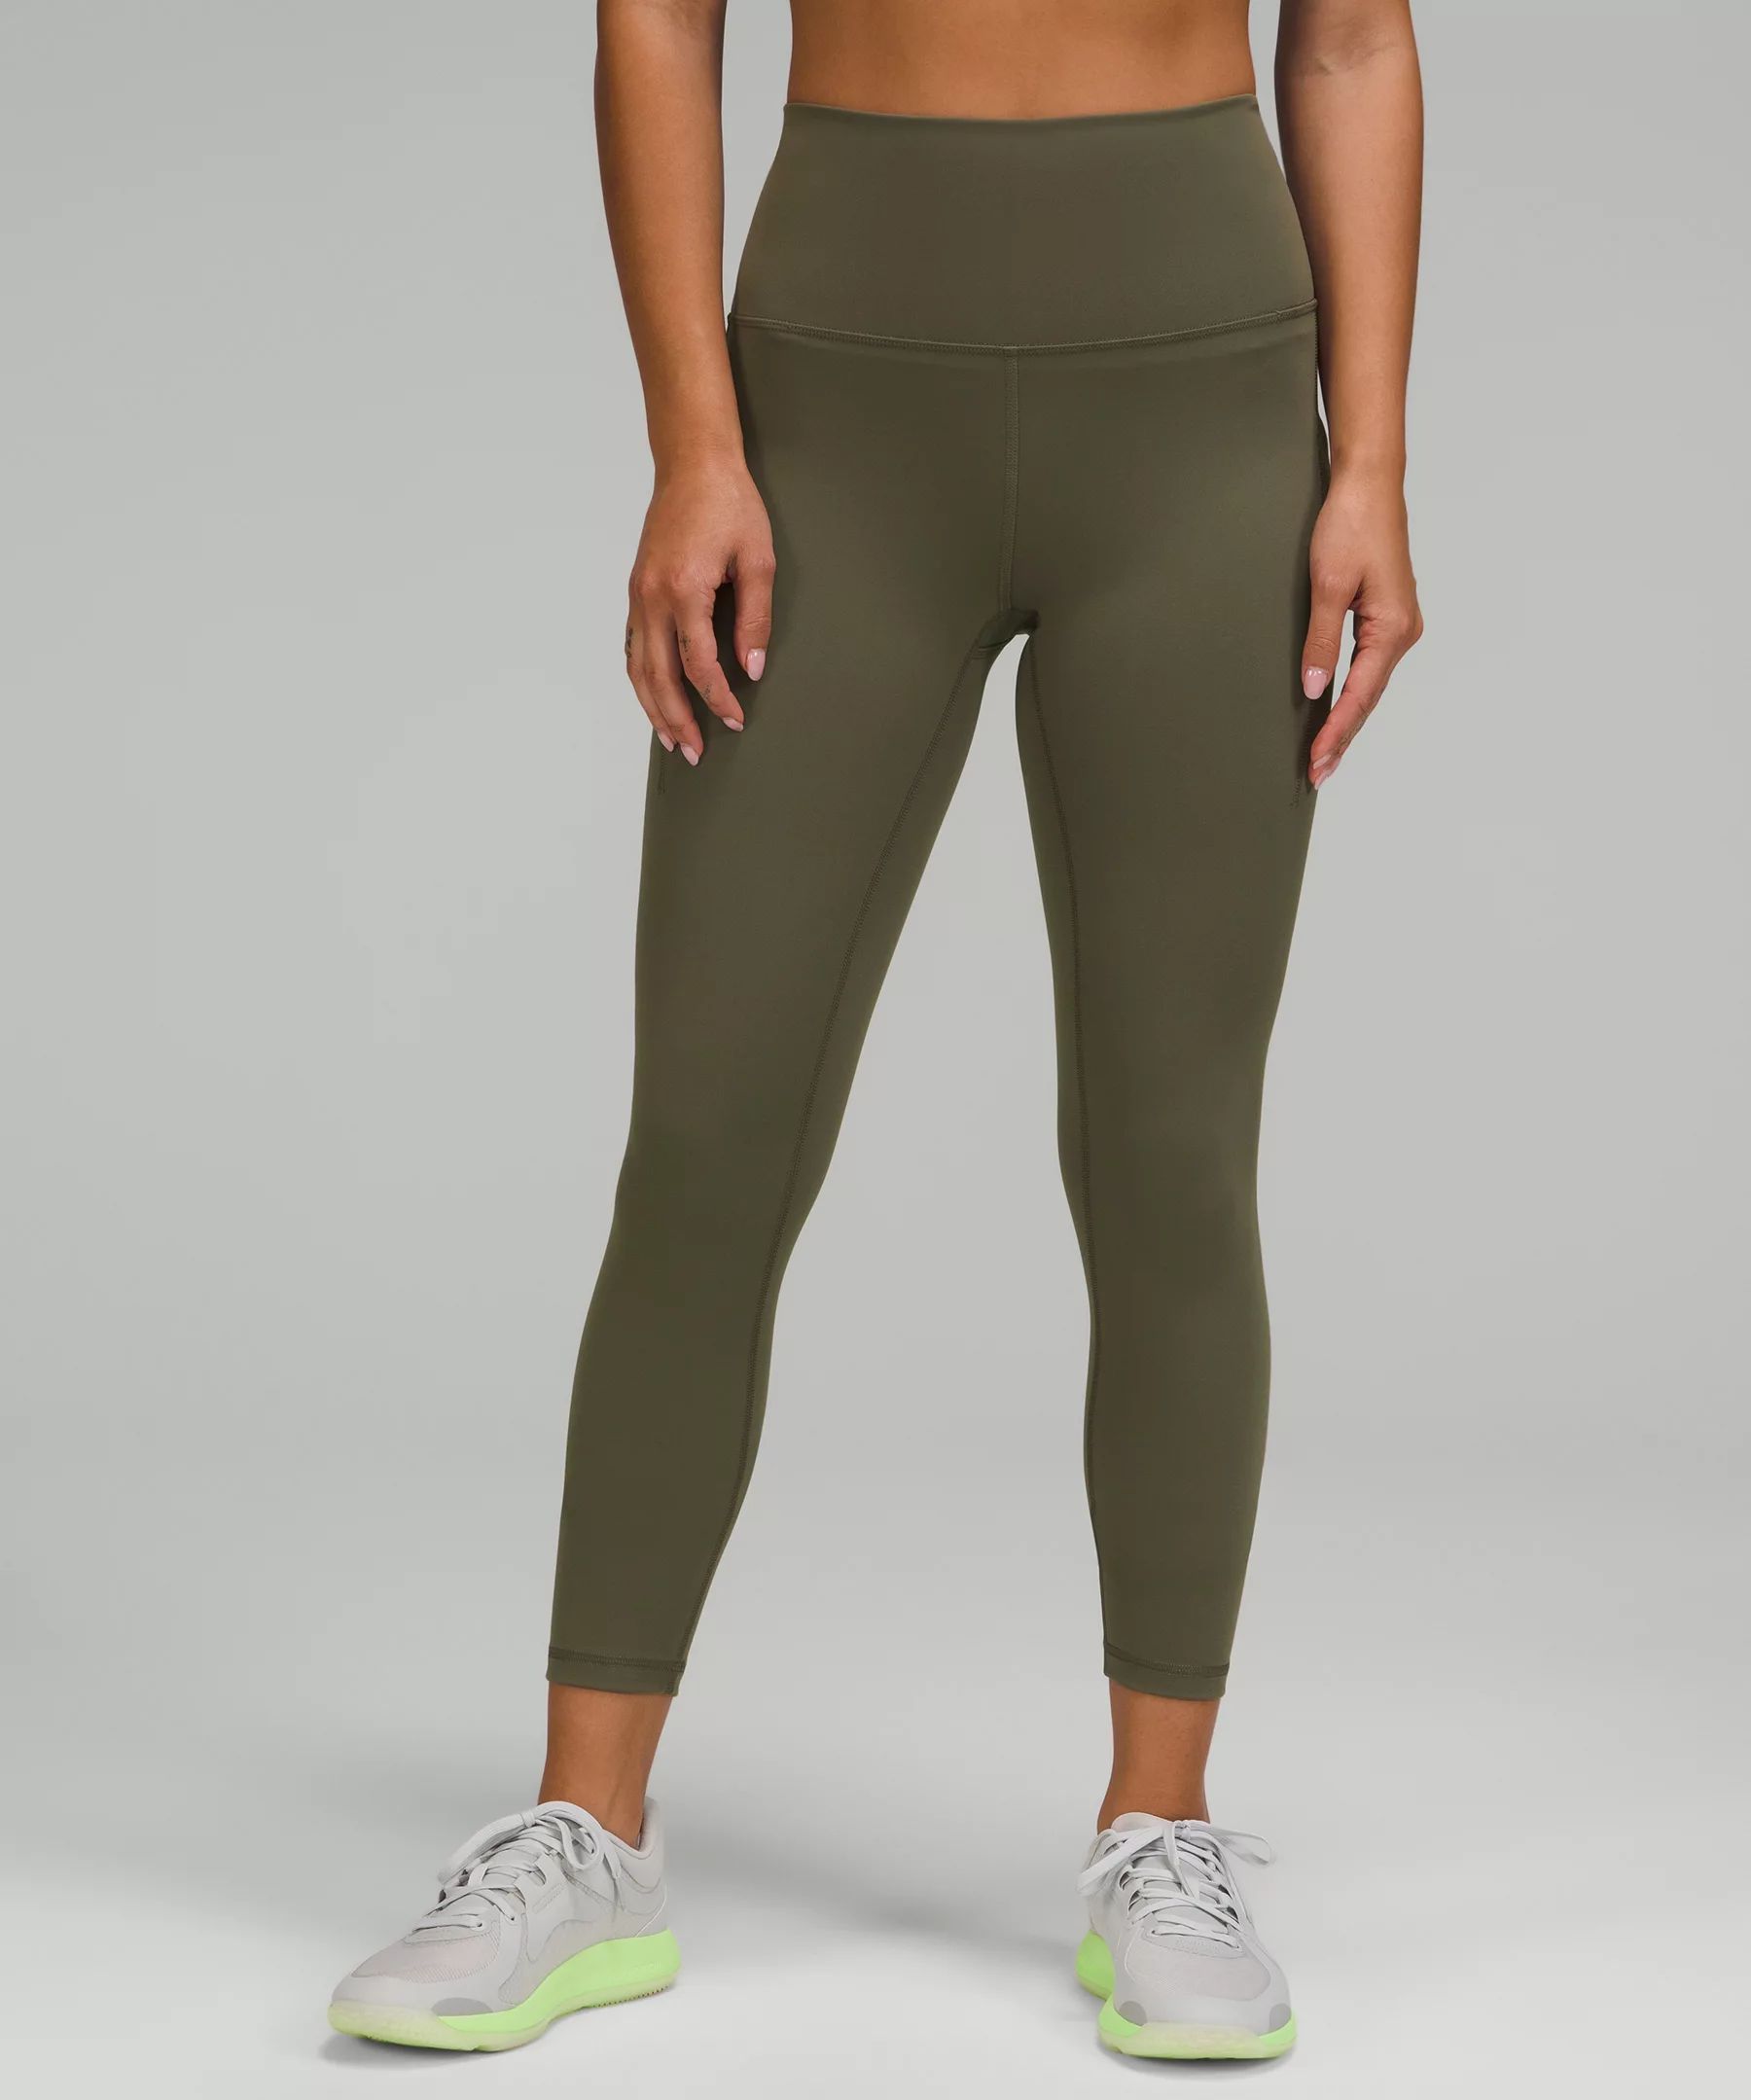 Wunder Train High-Rise Tight with Pockets 25" | Lululemon (US)